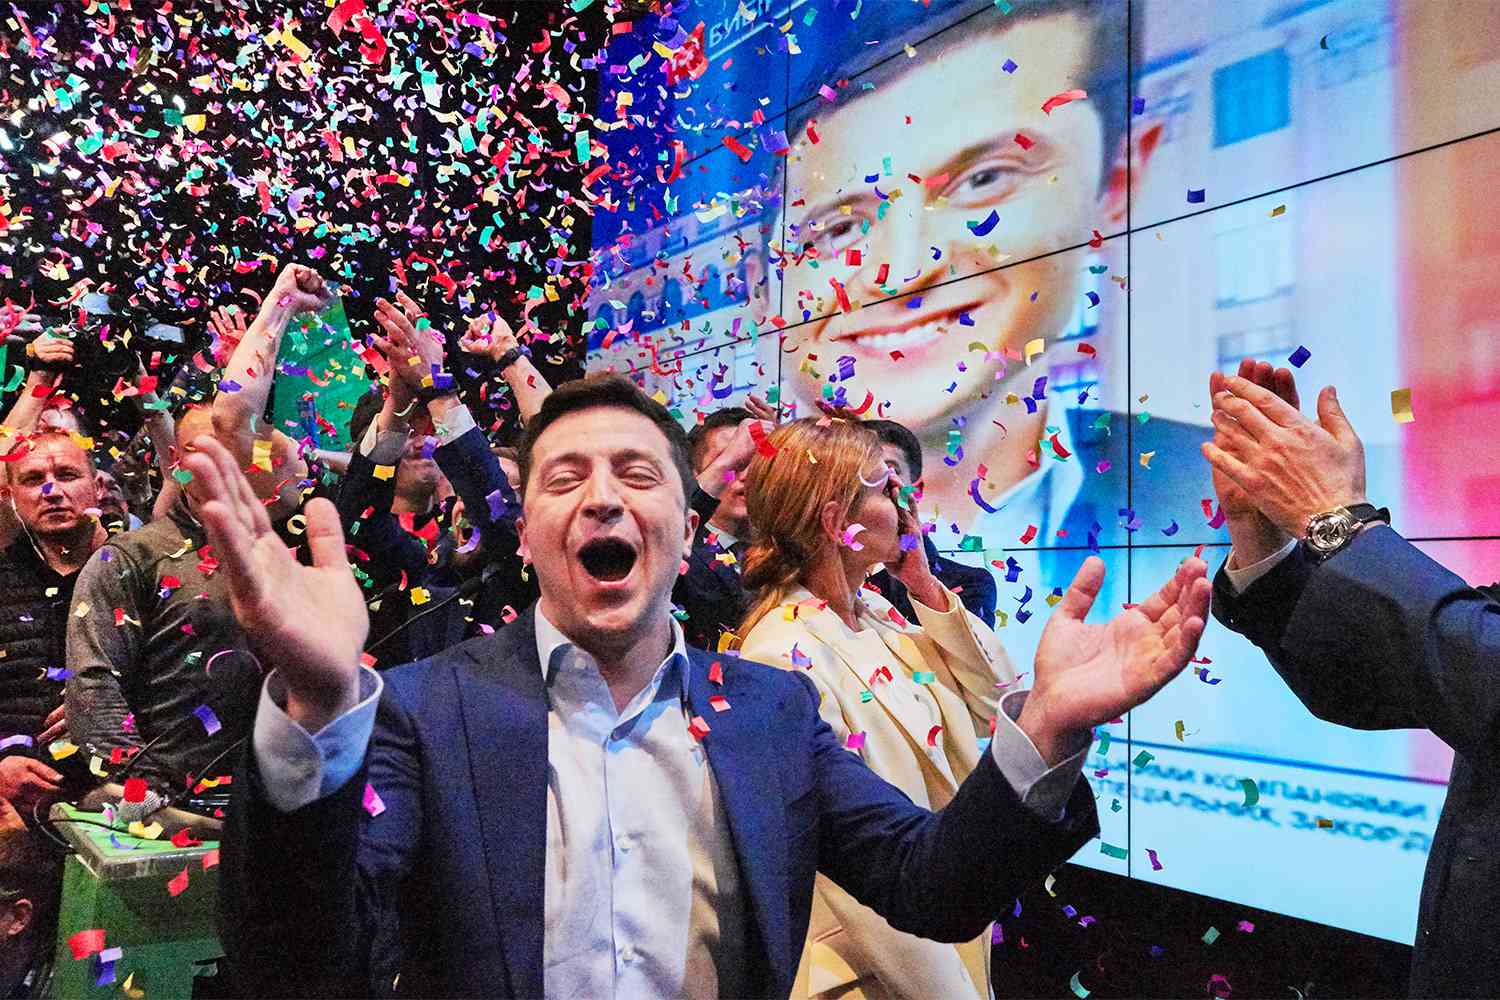 Volodymyr Zelenskyy's Friends Describe Him as Family Man Turned Leader |  PEOPLE.com